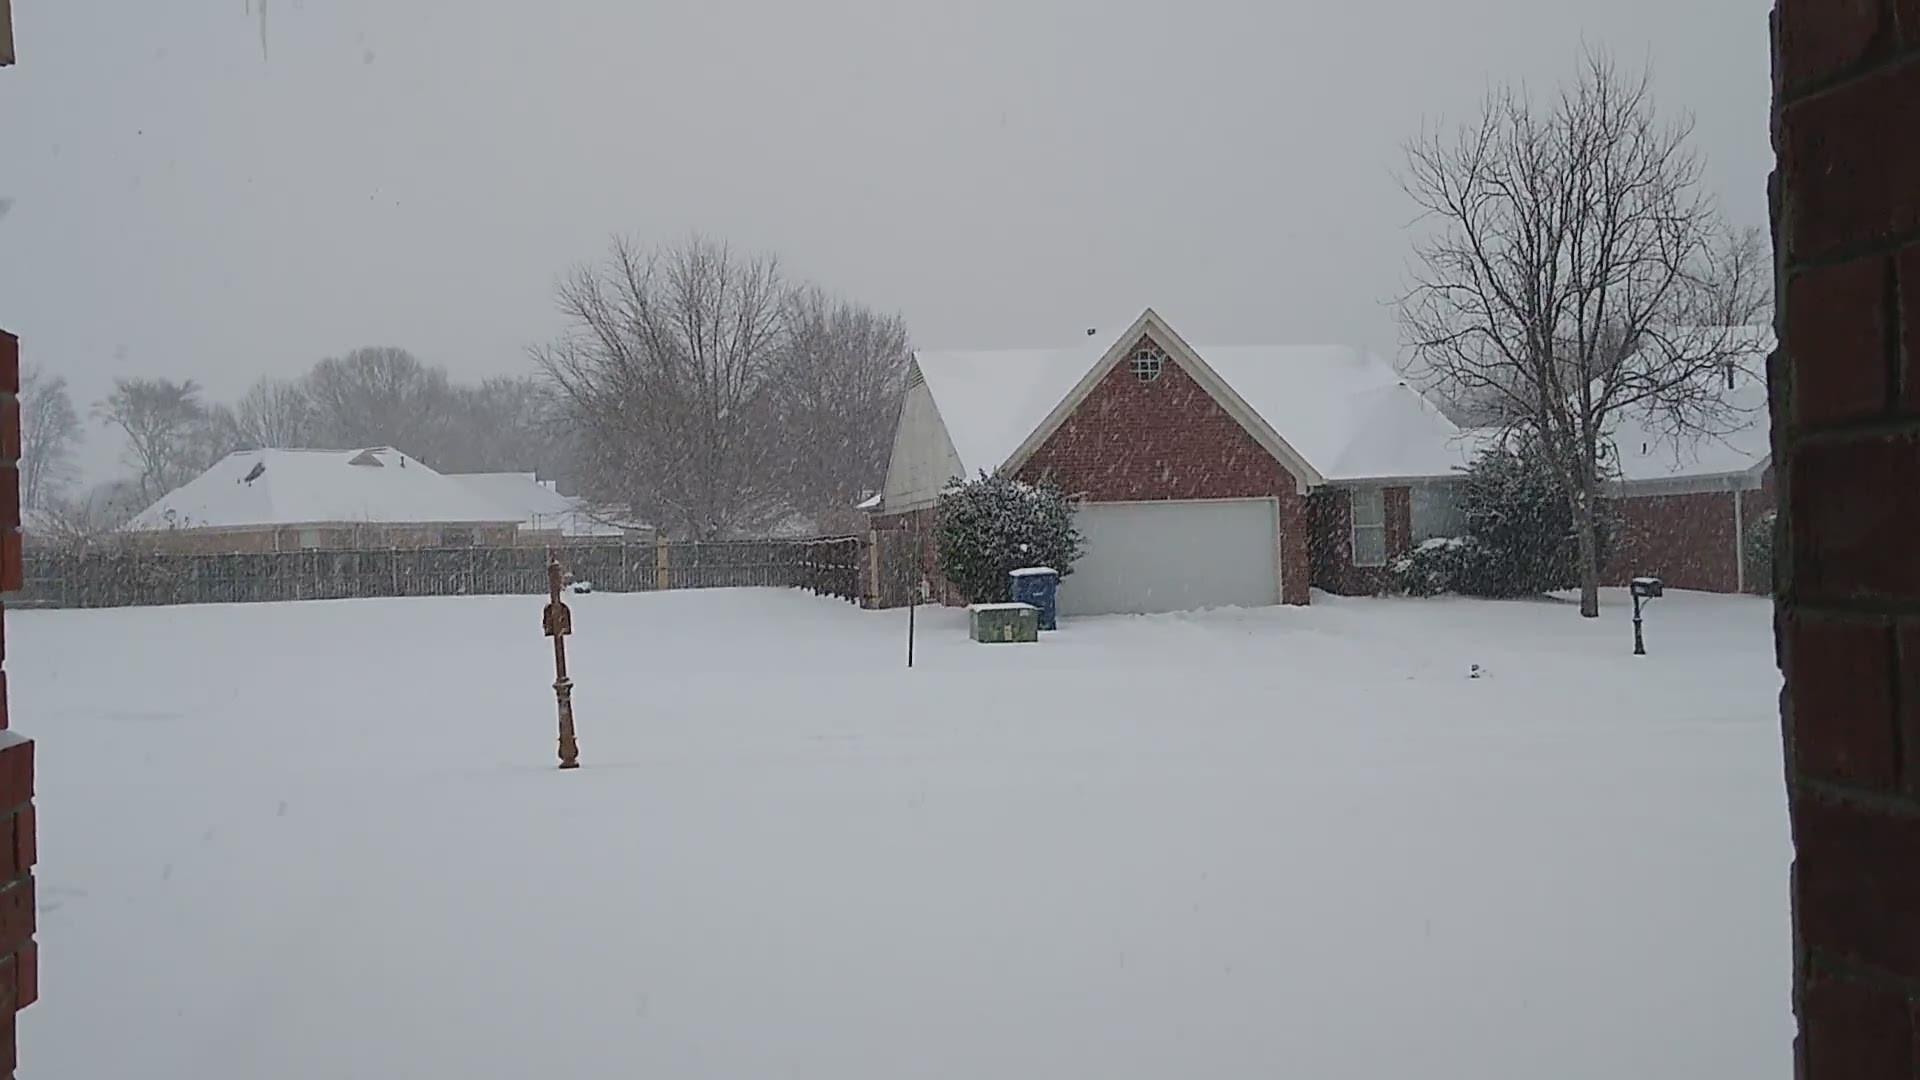 Heavy Snowfall - Olive Branch, MS
Credit: Richardson family